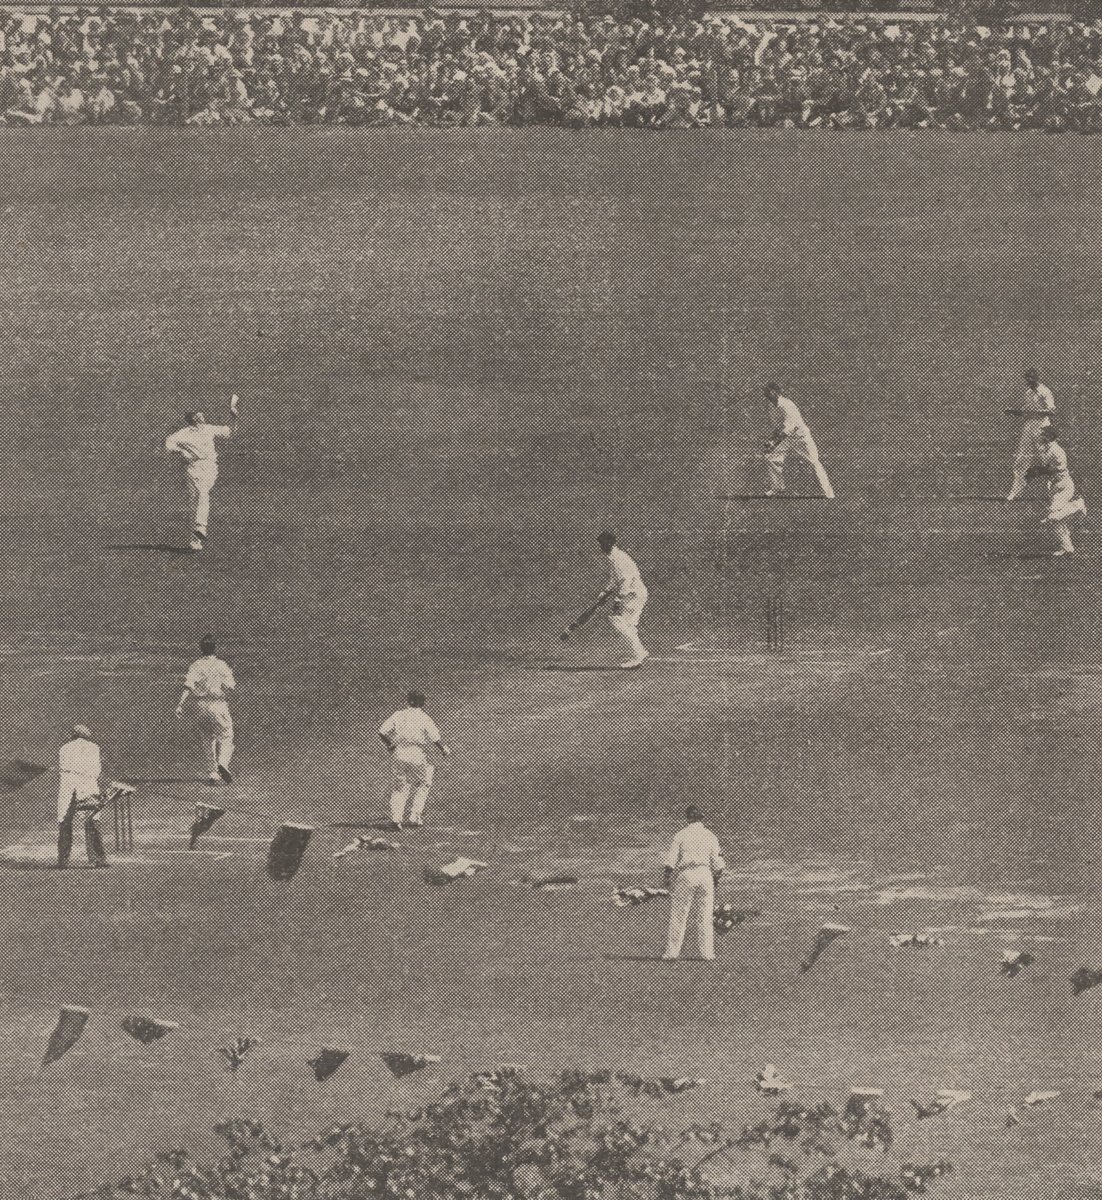 Alan Kippax (83) and Don Bradman (254) batting as Australia piled up 729 for 6, 2nd Test, Lord's, June 30th 1930. This remains the highest team total made on the ground